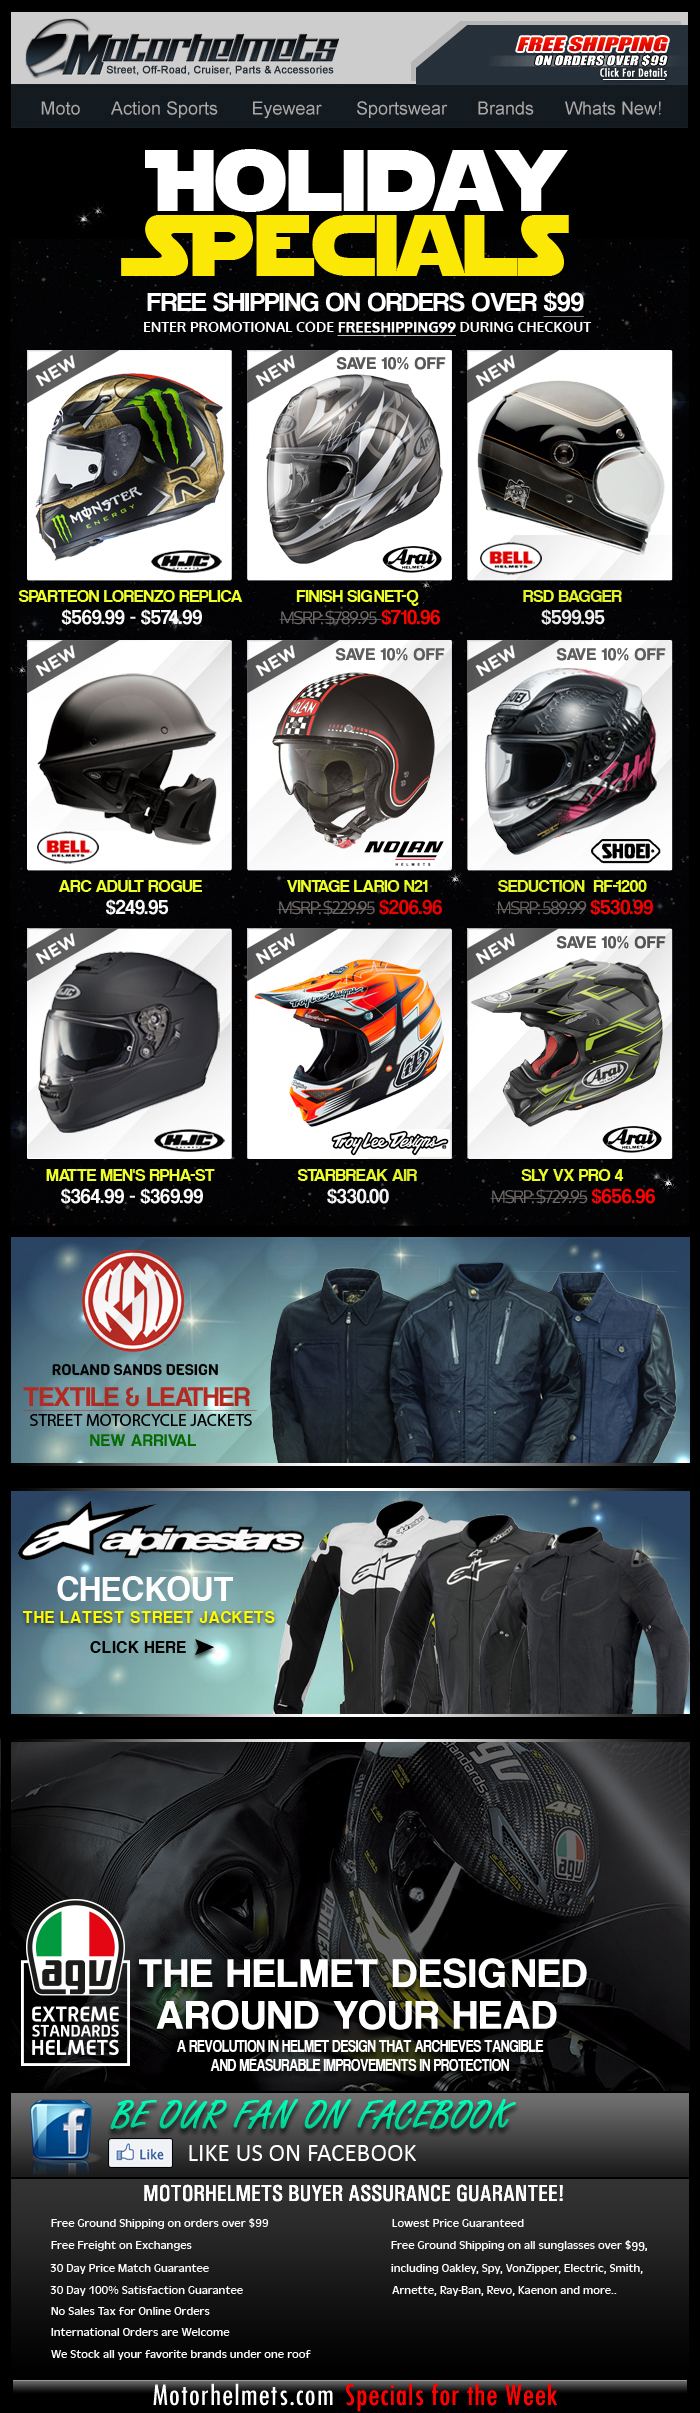 HJC, Shoei, Bell and More Last Minute Holiday Gift Ideas! 